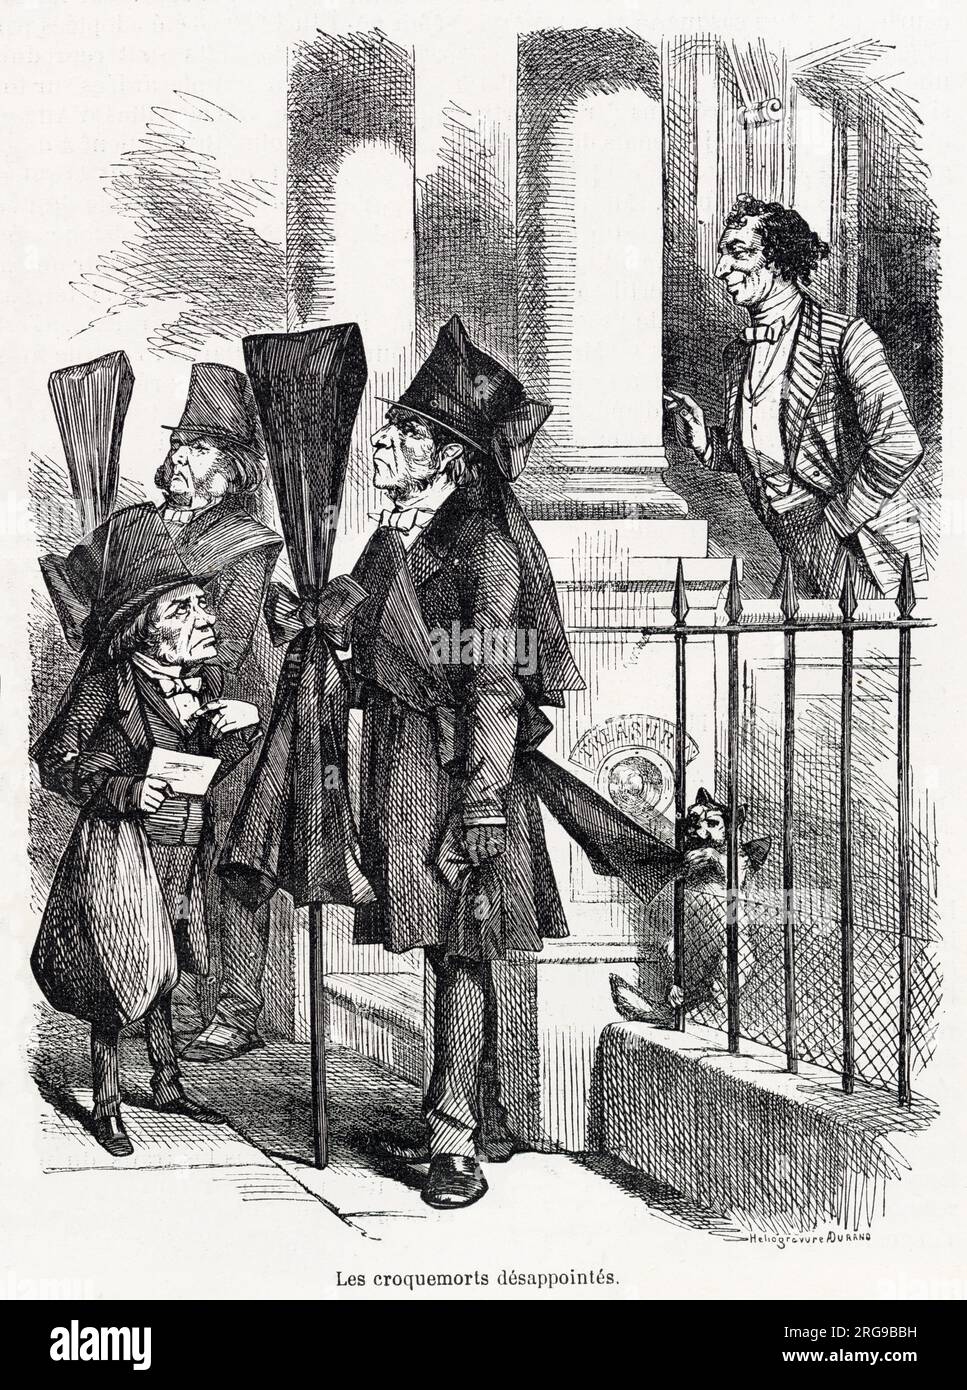 Cartoon, The Disappointed Undertakers -- a satirical comment on the rivaly between the Liberal Party (represented by Lord John Russell, John Bright and William Gladstone), and the Conservative Party (Benjamin Disraeli). Disraeli is clearly staying where he is, at the Treasury (at least for the time being). Stock Photo